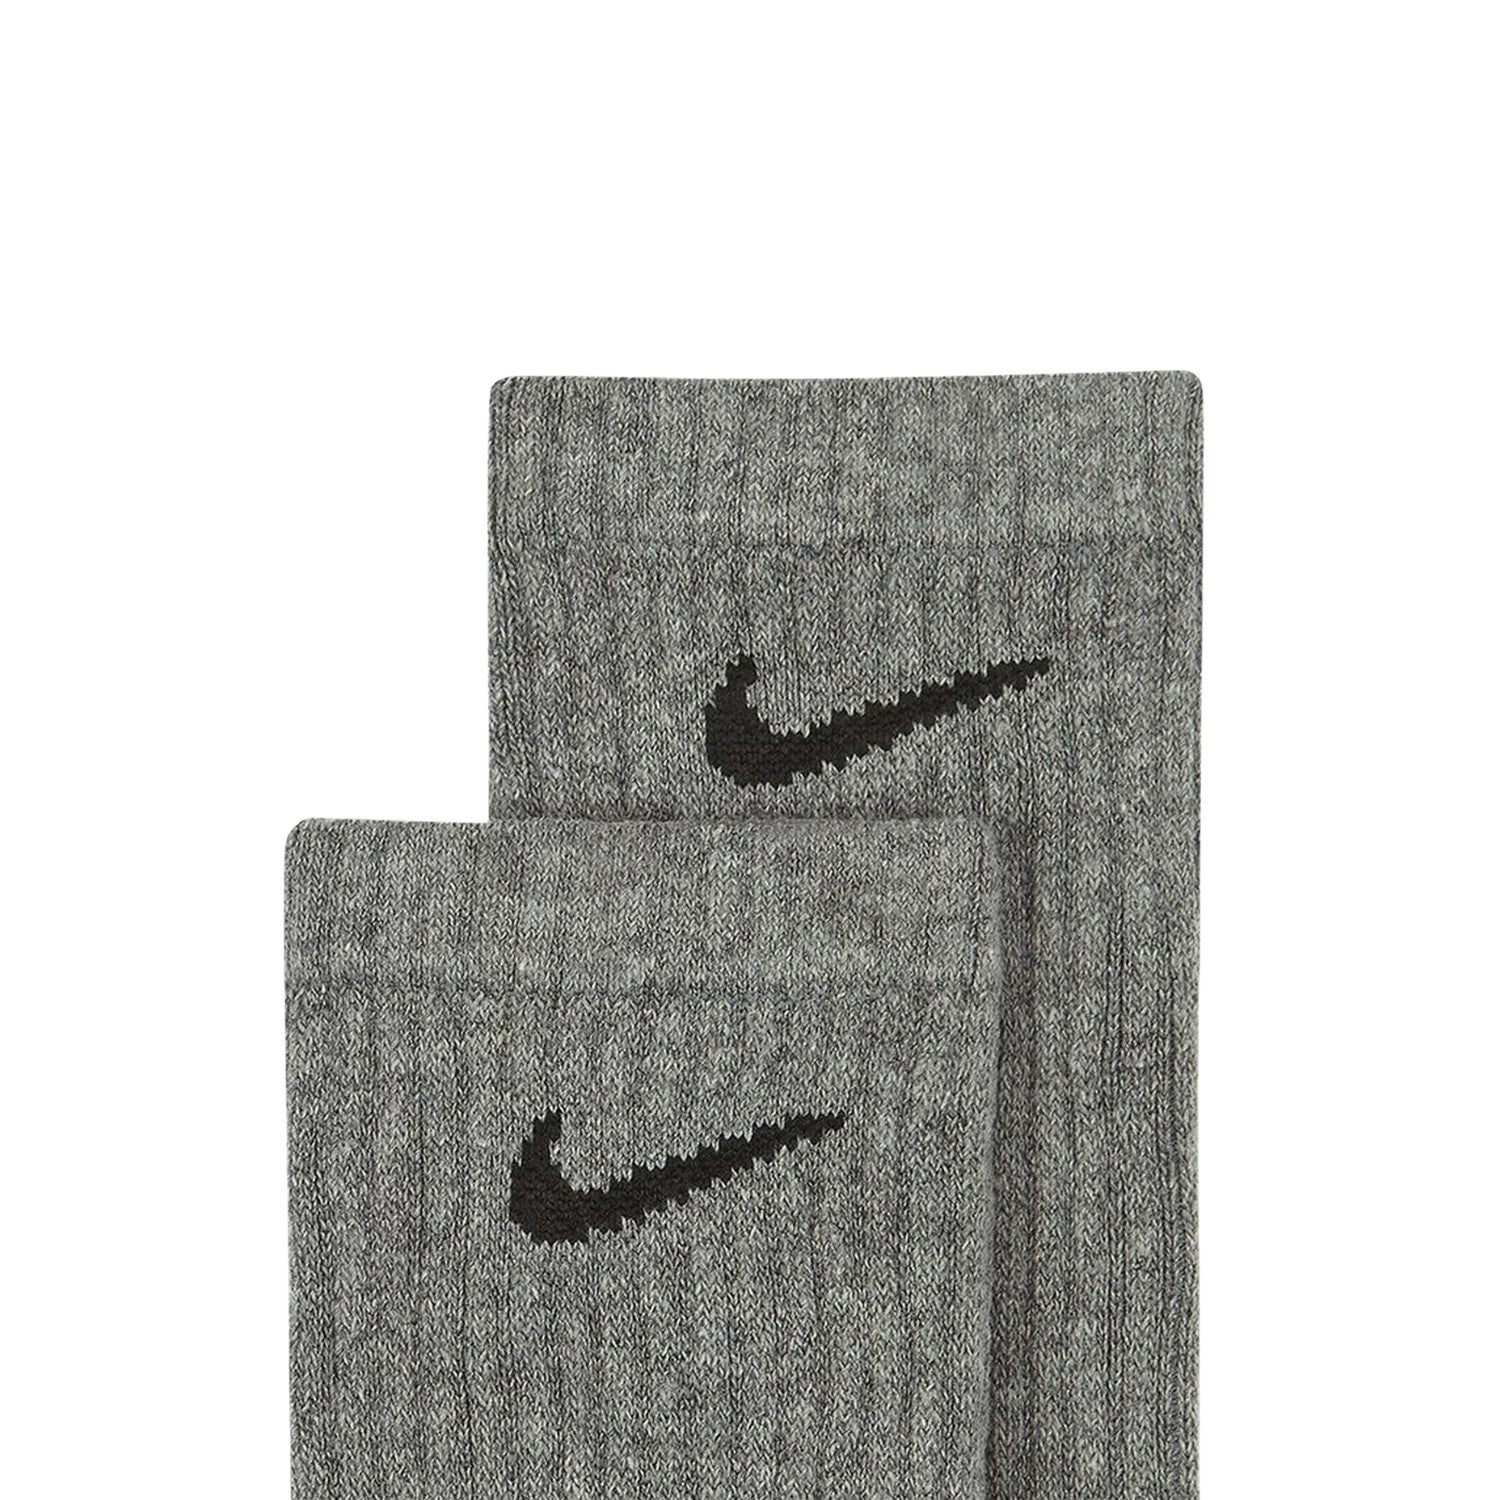 Nike Everyday Plus Cushion No Show 6 Pack Mens Style : Sx7666